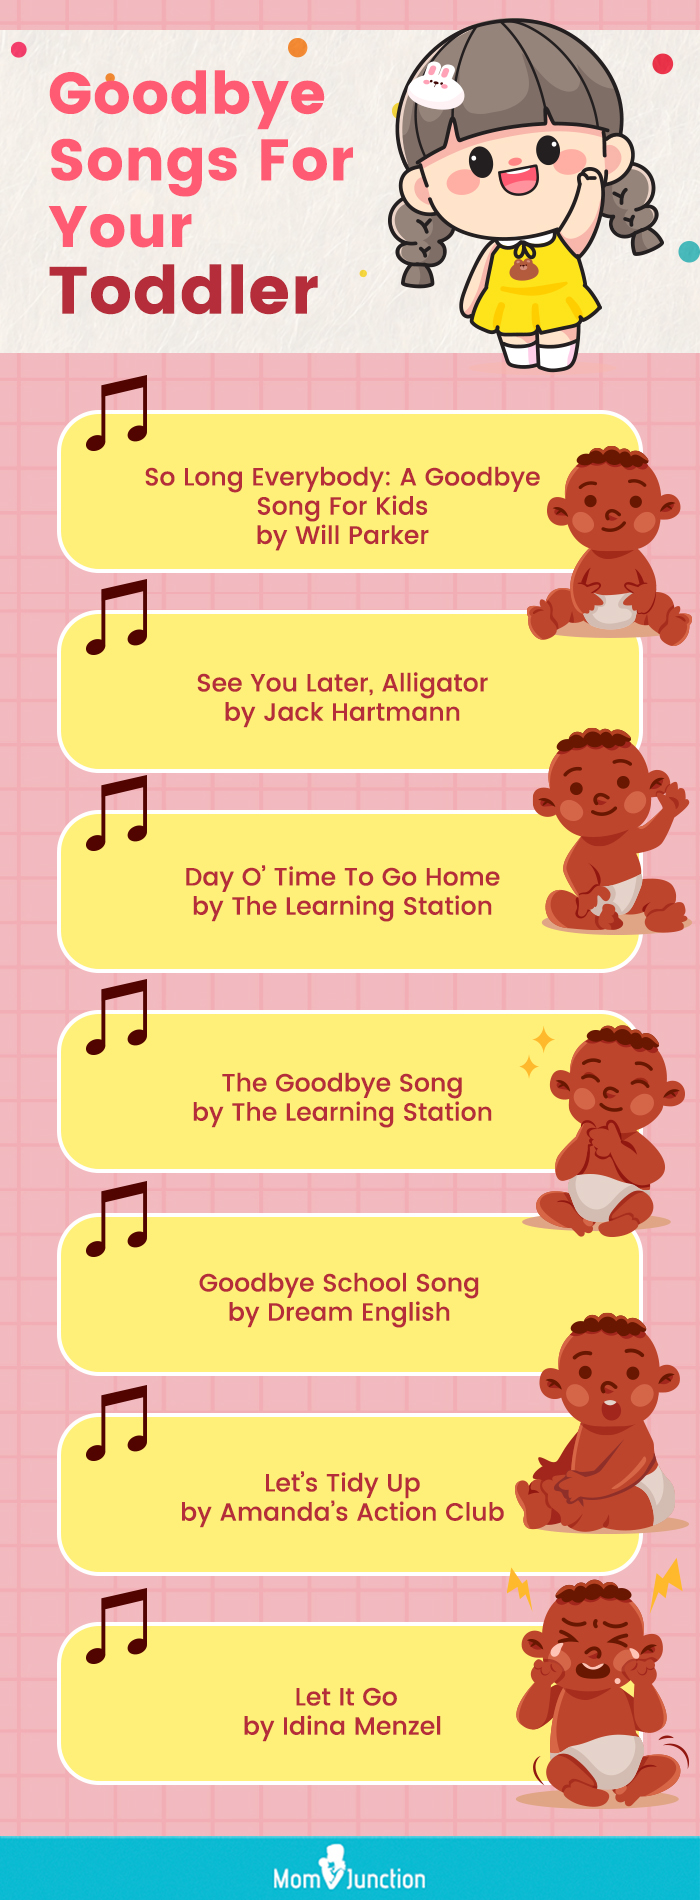 goodbye songs for your toddler (infographic)